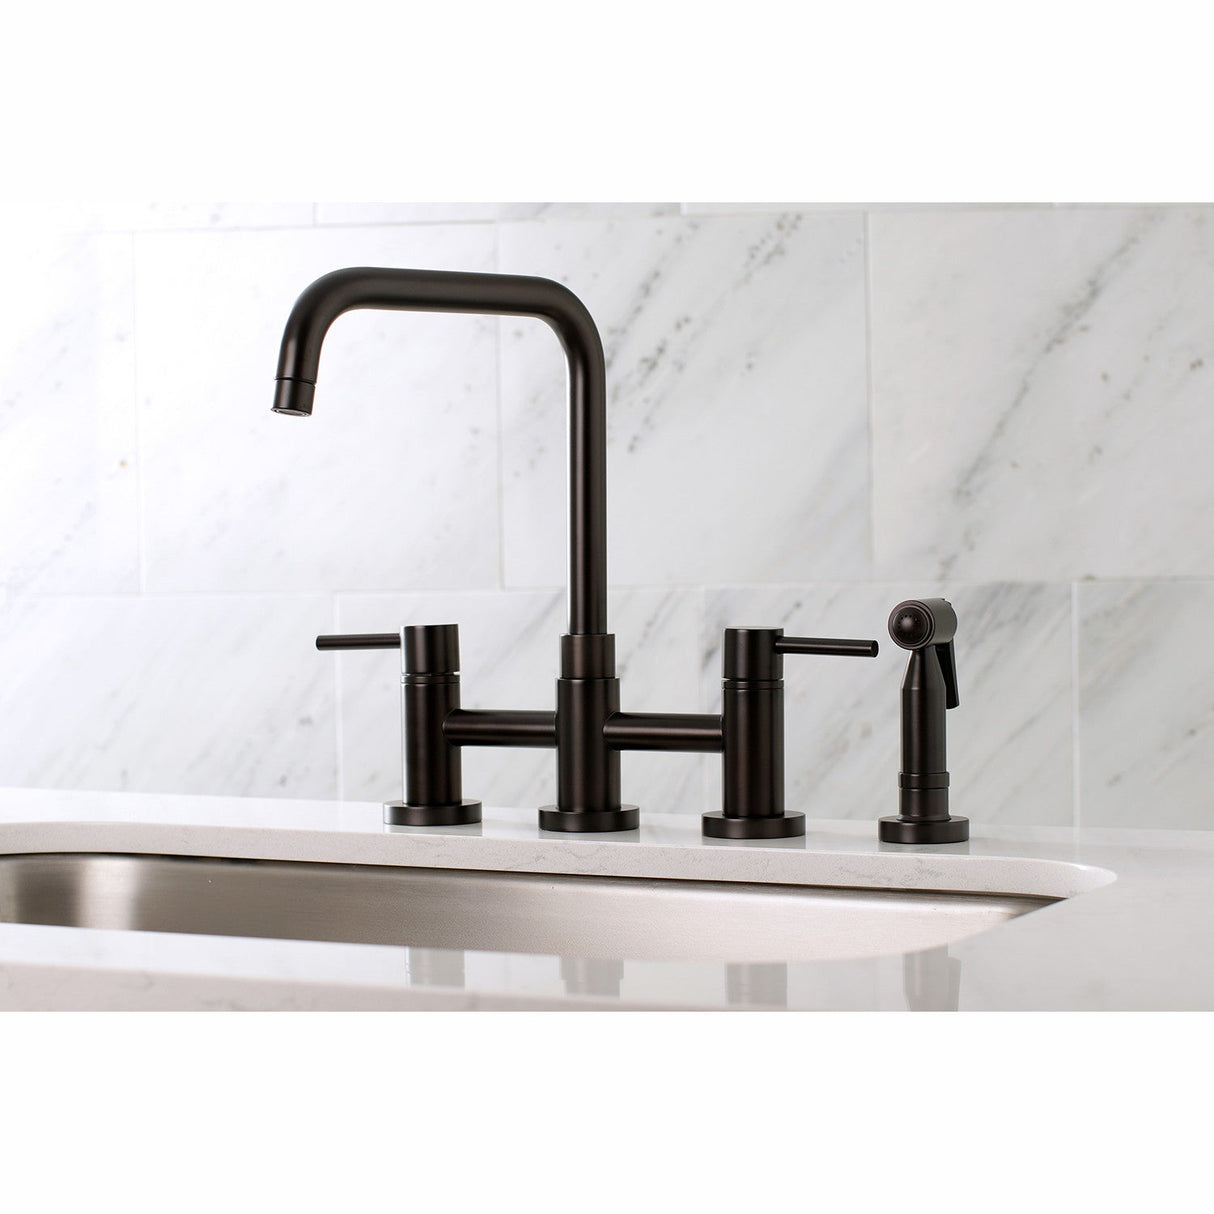 Concord KS8285DLBS Two-Handle 4-Hole Deck Mount Bridge Kitchen Faucet with Brass Sprayer, Oil Rubbed Bronze